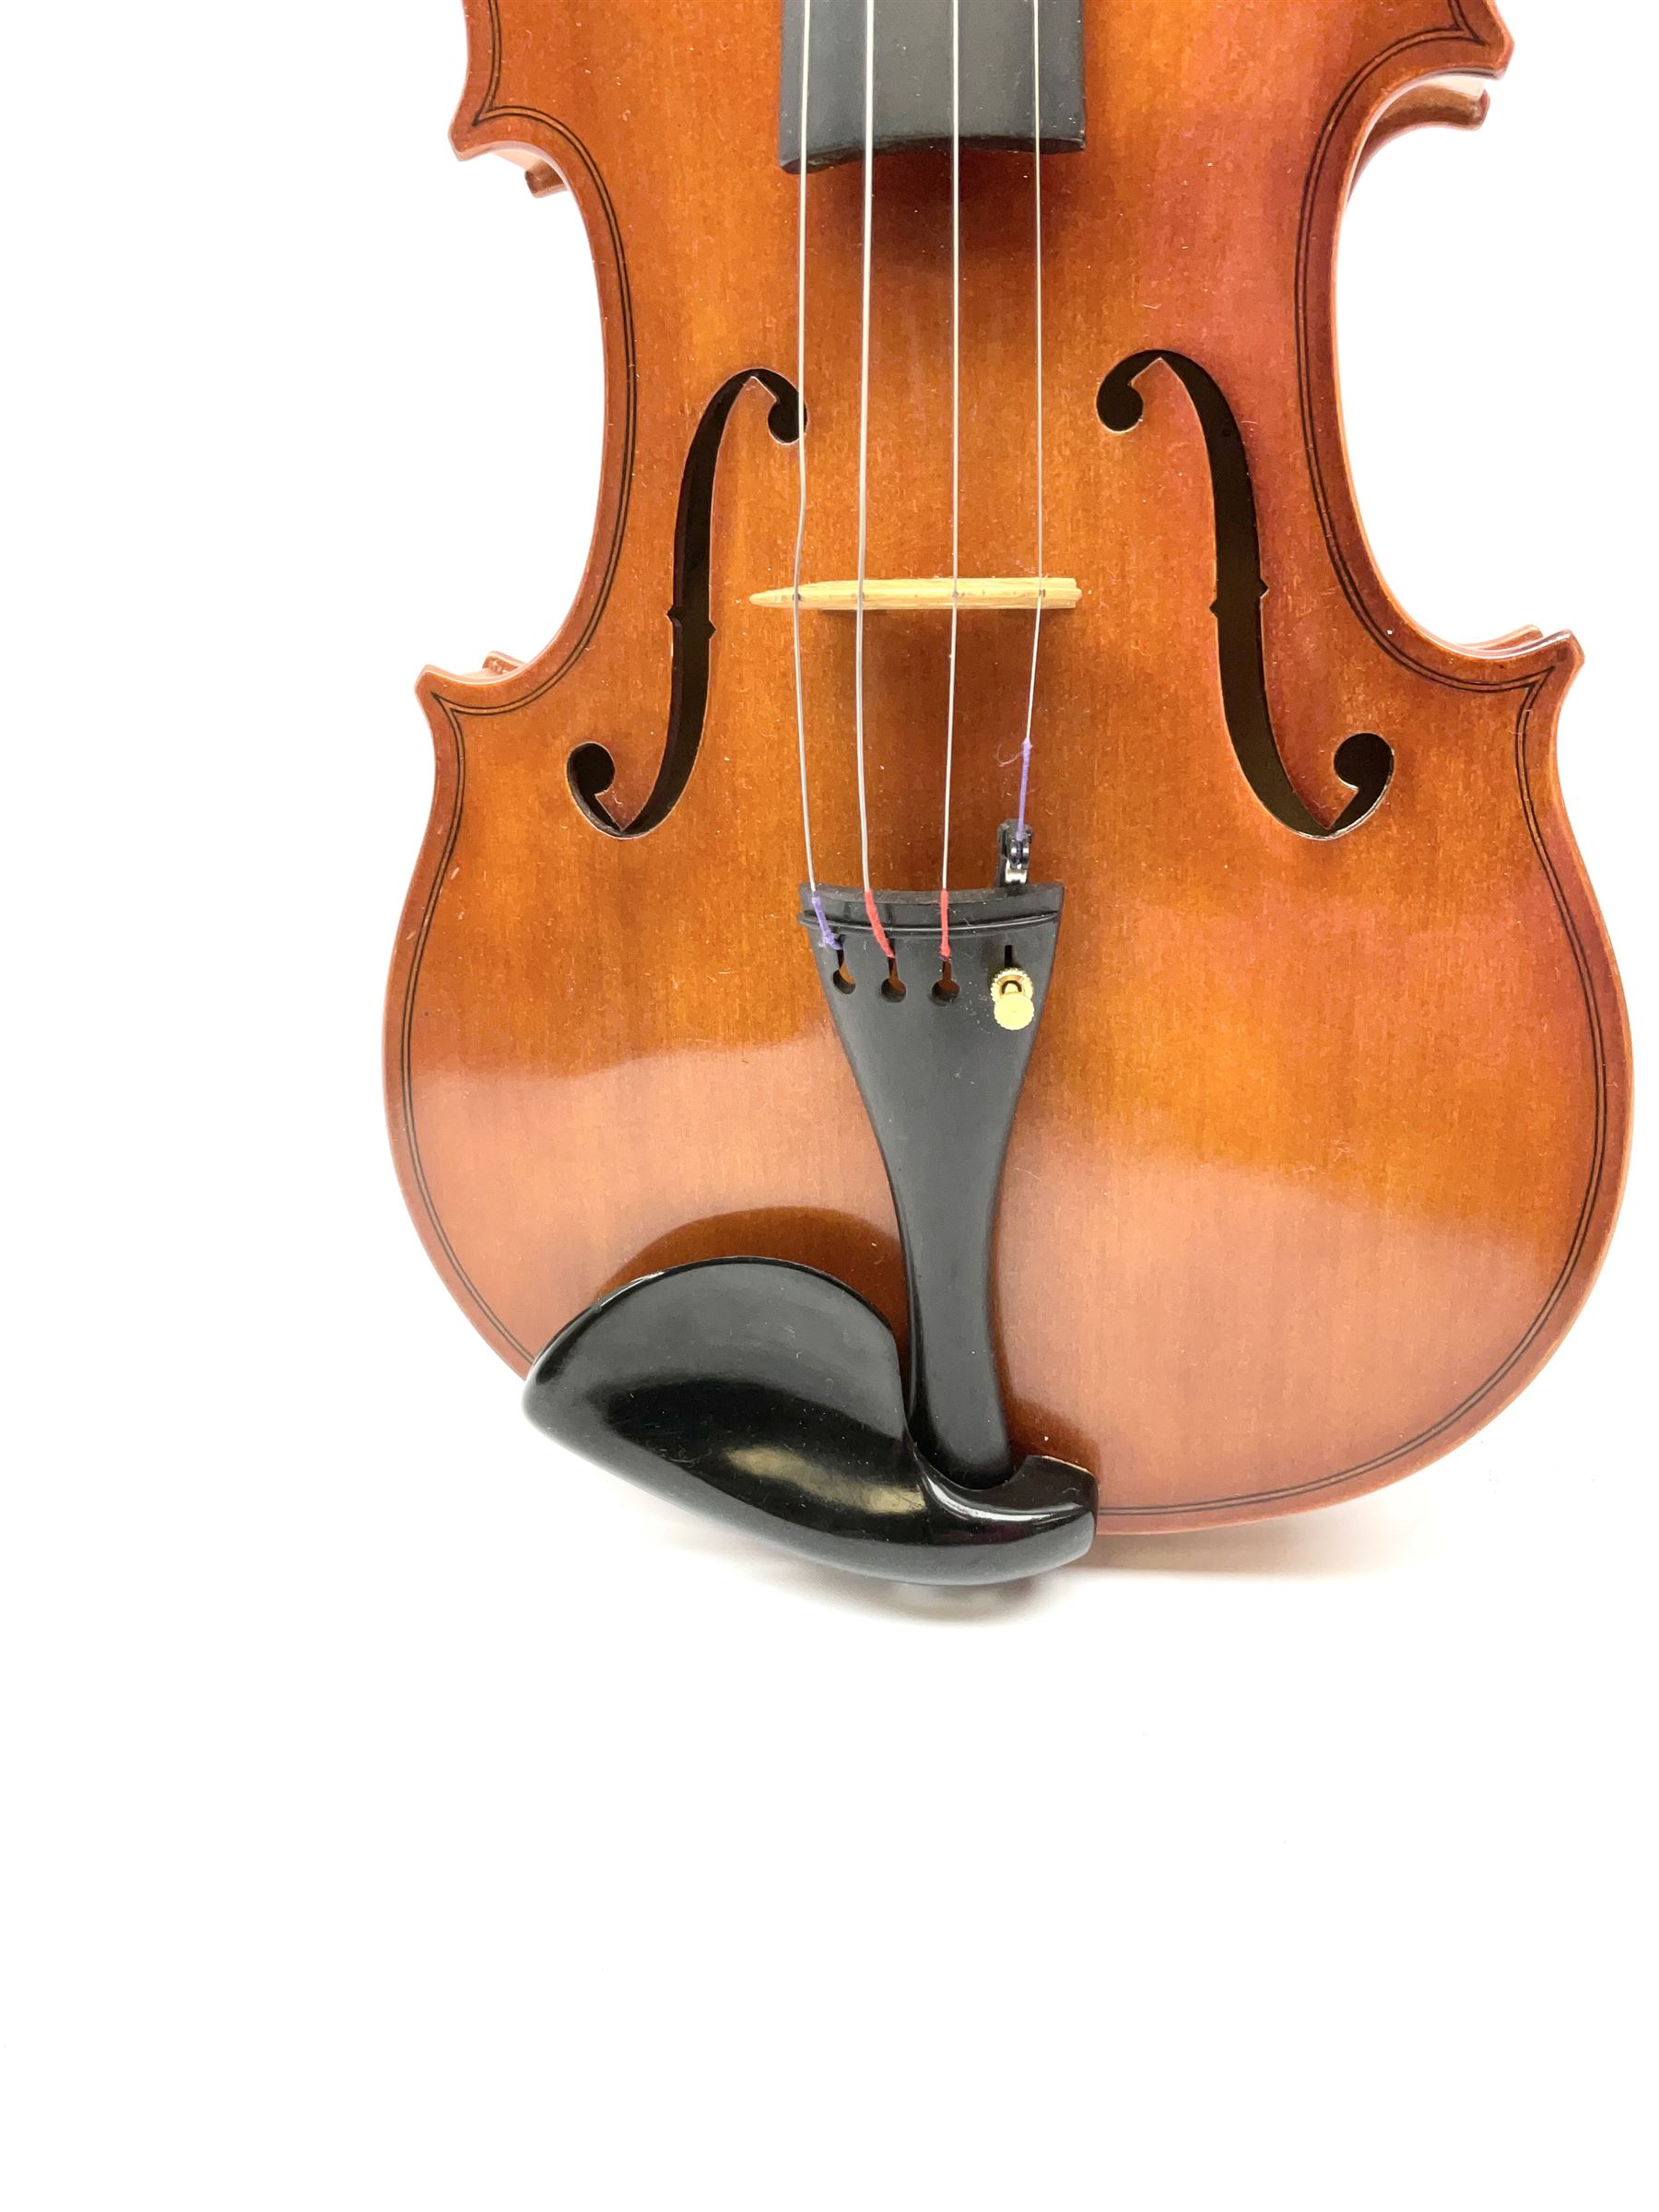 Modern violin with 36cm two-piece maple back and ribs and spruce top 60cm overall - Image 6 of 16